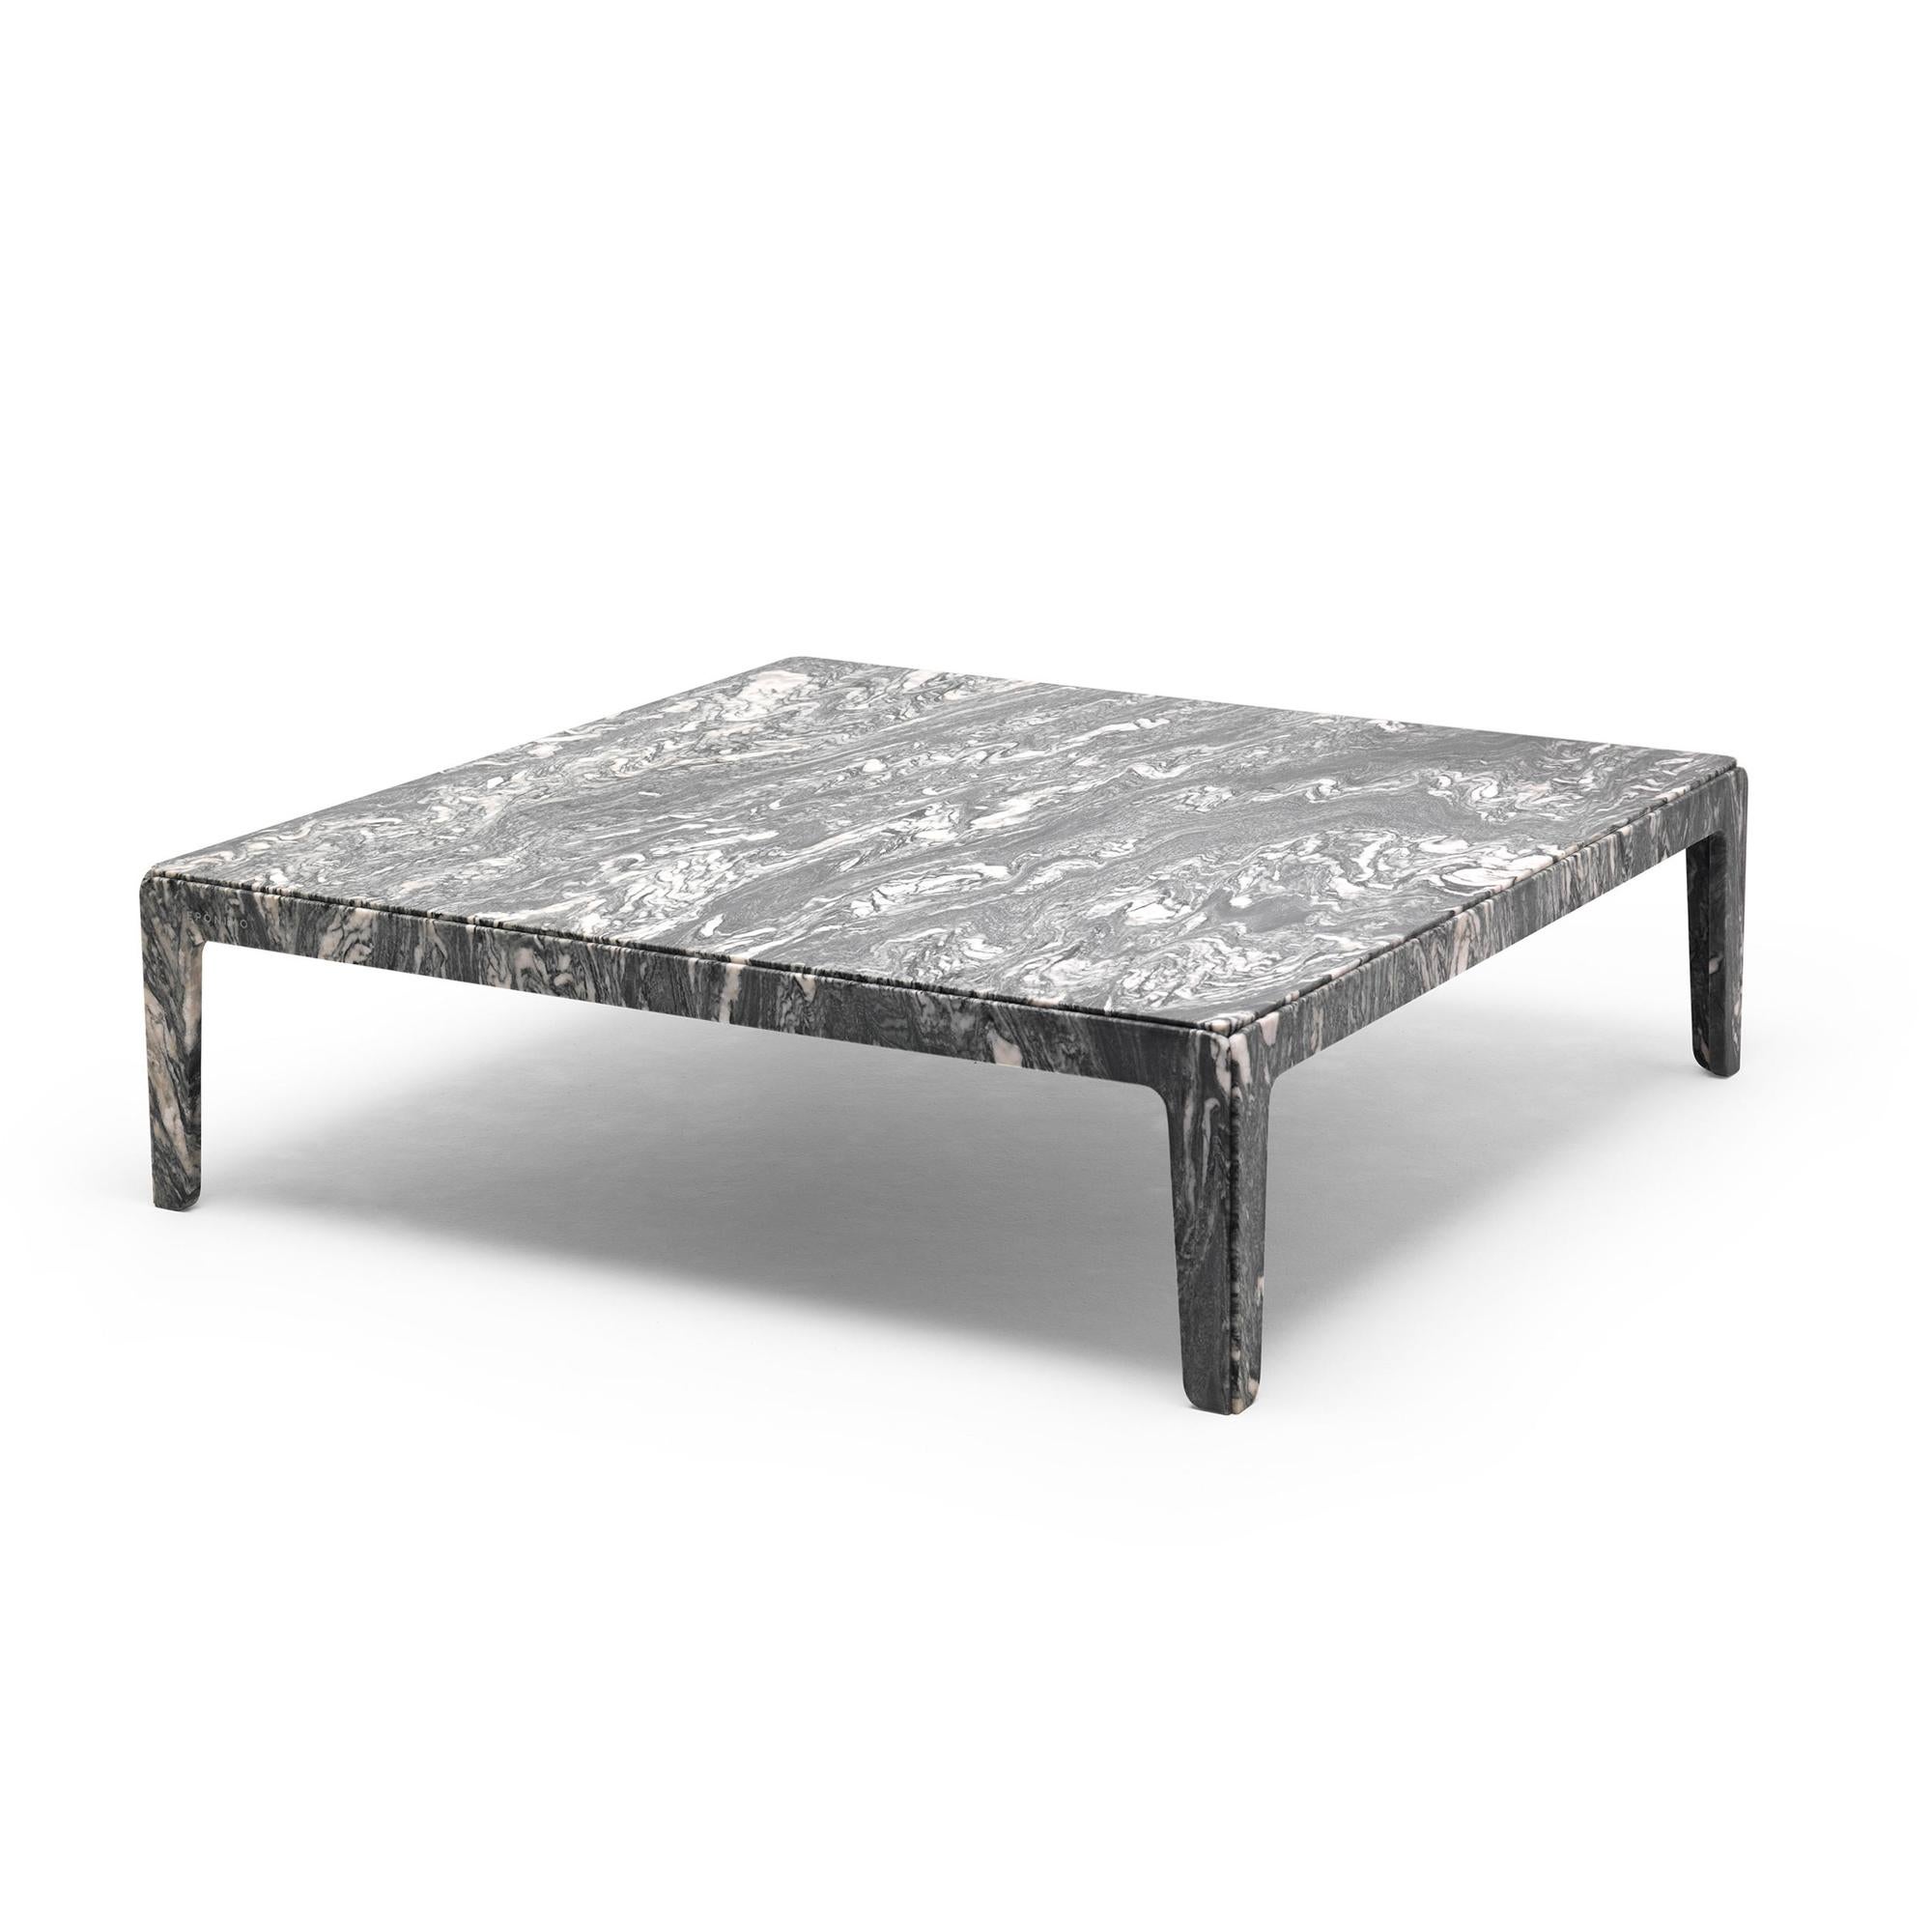 Carved 21st Century Modern Sculptural Coffe Table In Solid New Saint Laurent Marble  For Sale